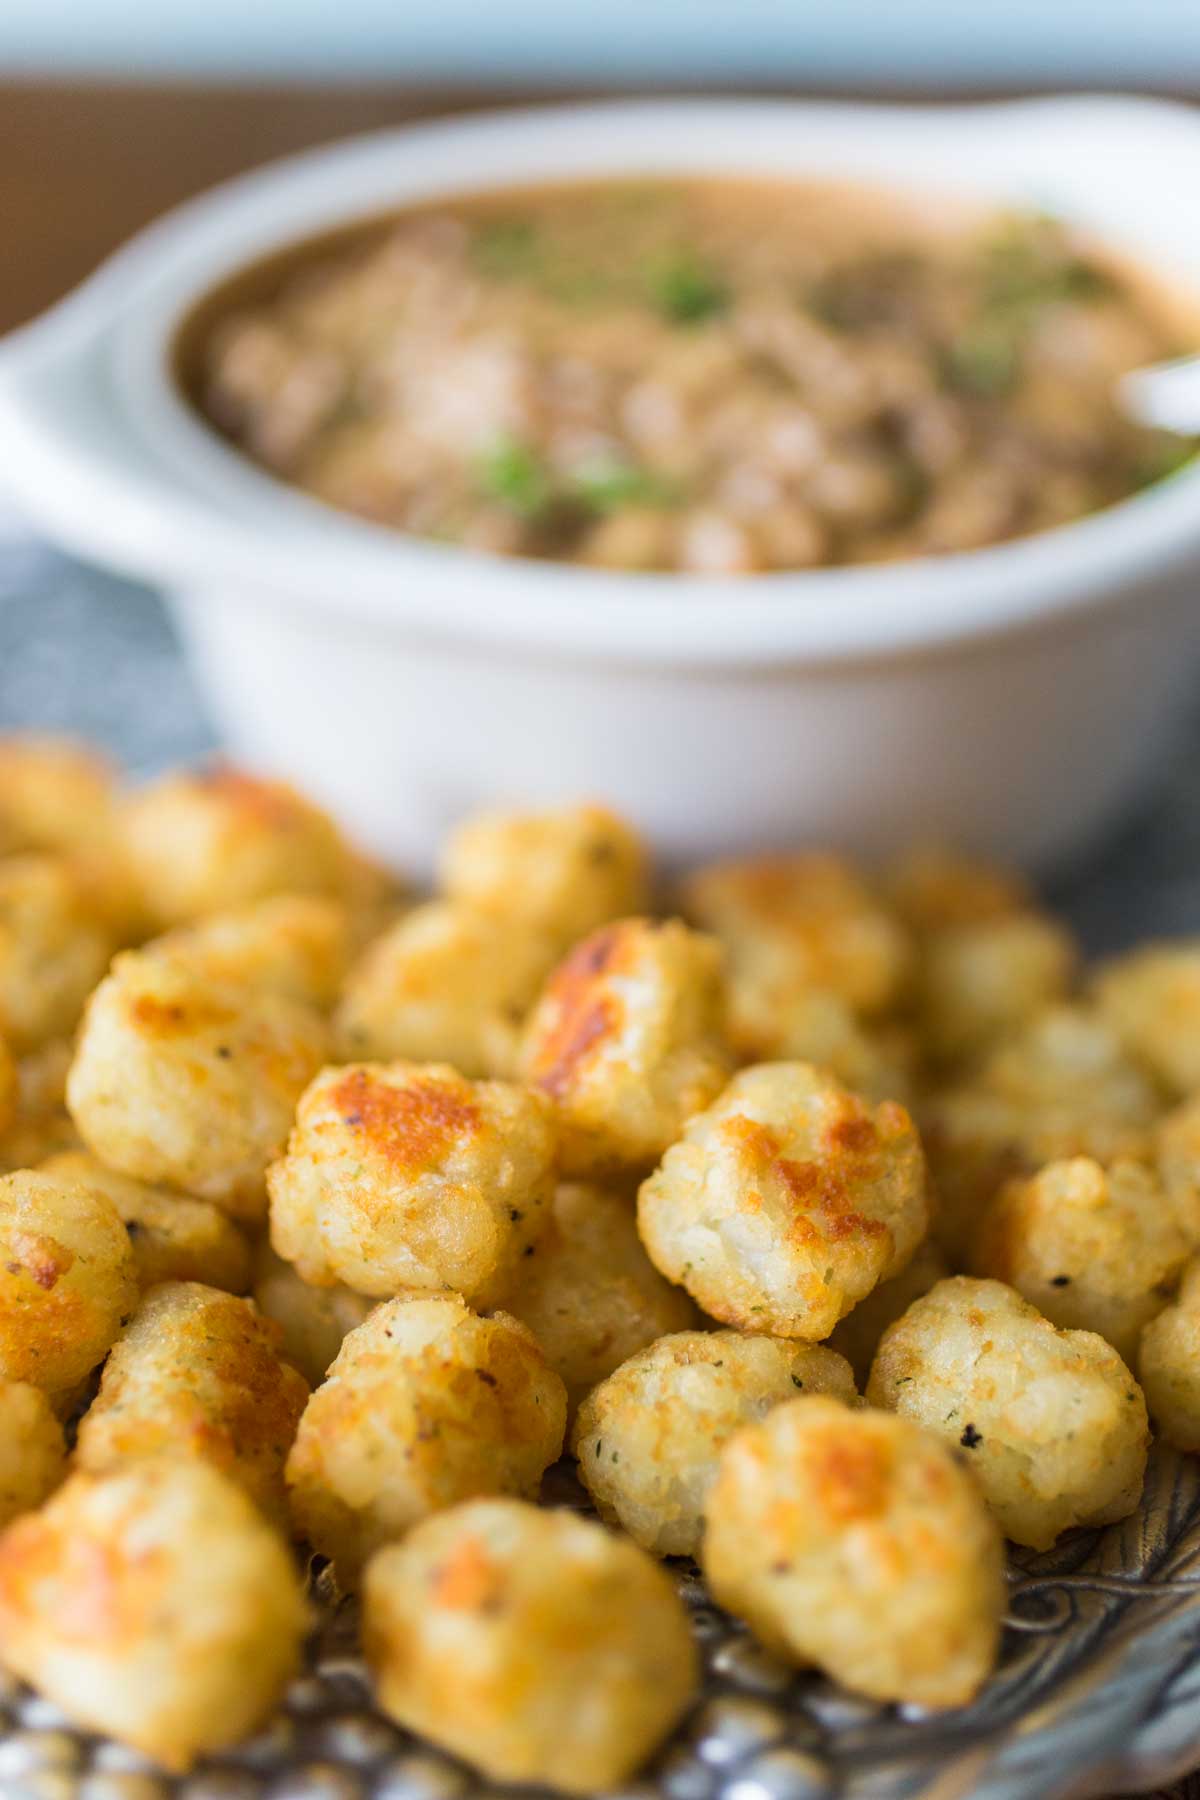 The close up photo of the tater tots shows the golden brown crunch.